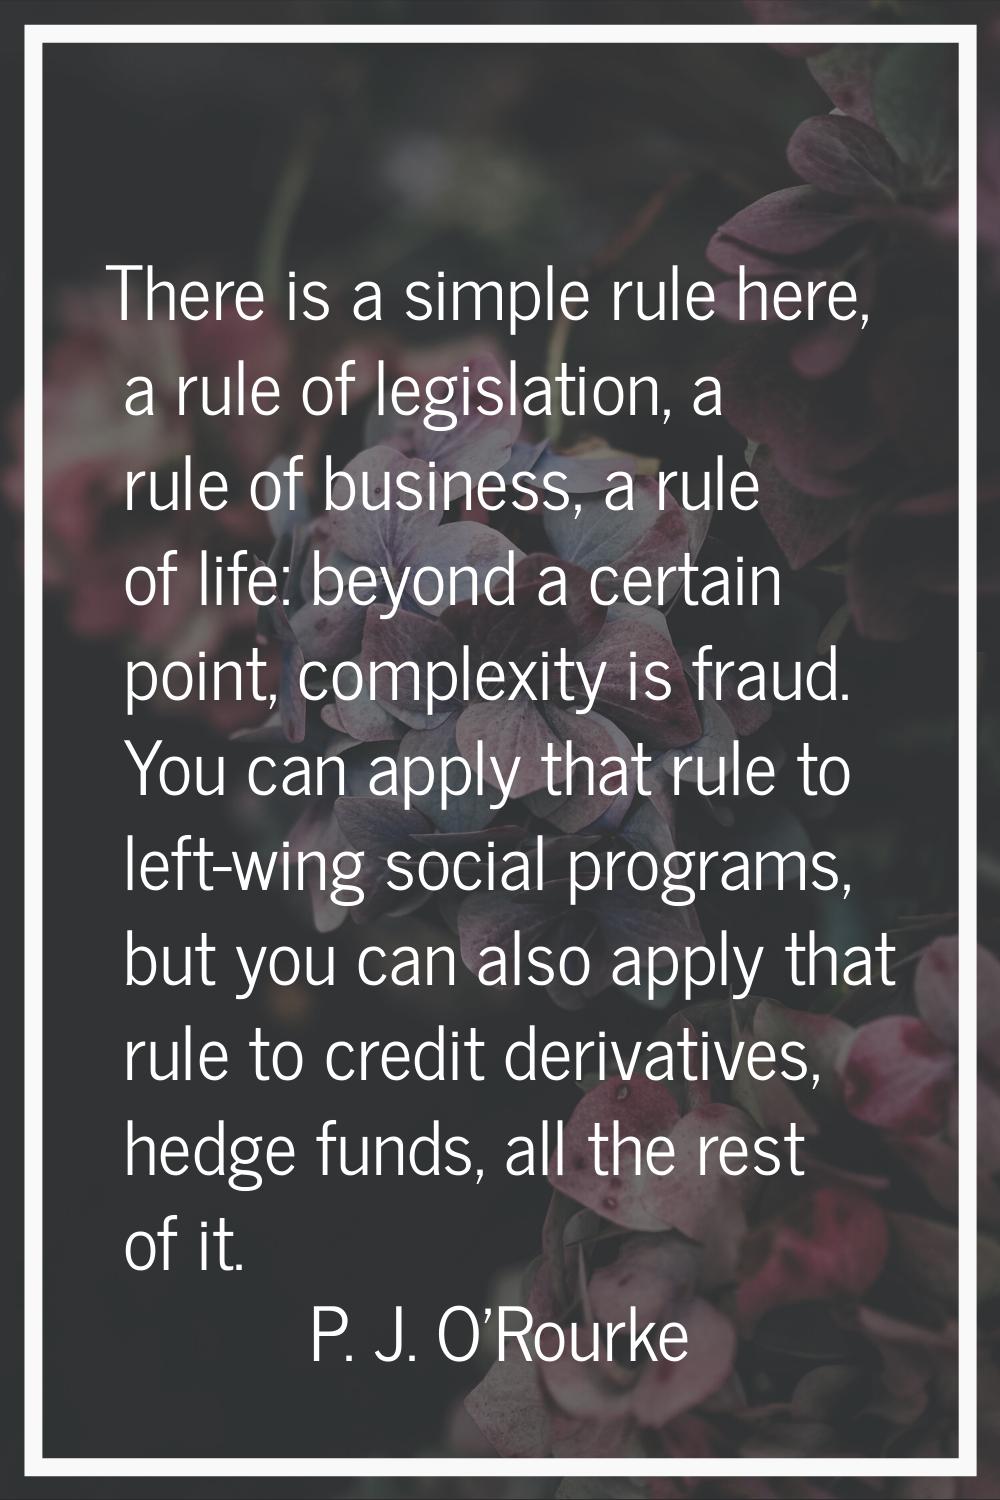 There is a simple rule here, a rule of legislation, a rule of business, a rule of life: beyond a ce